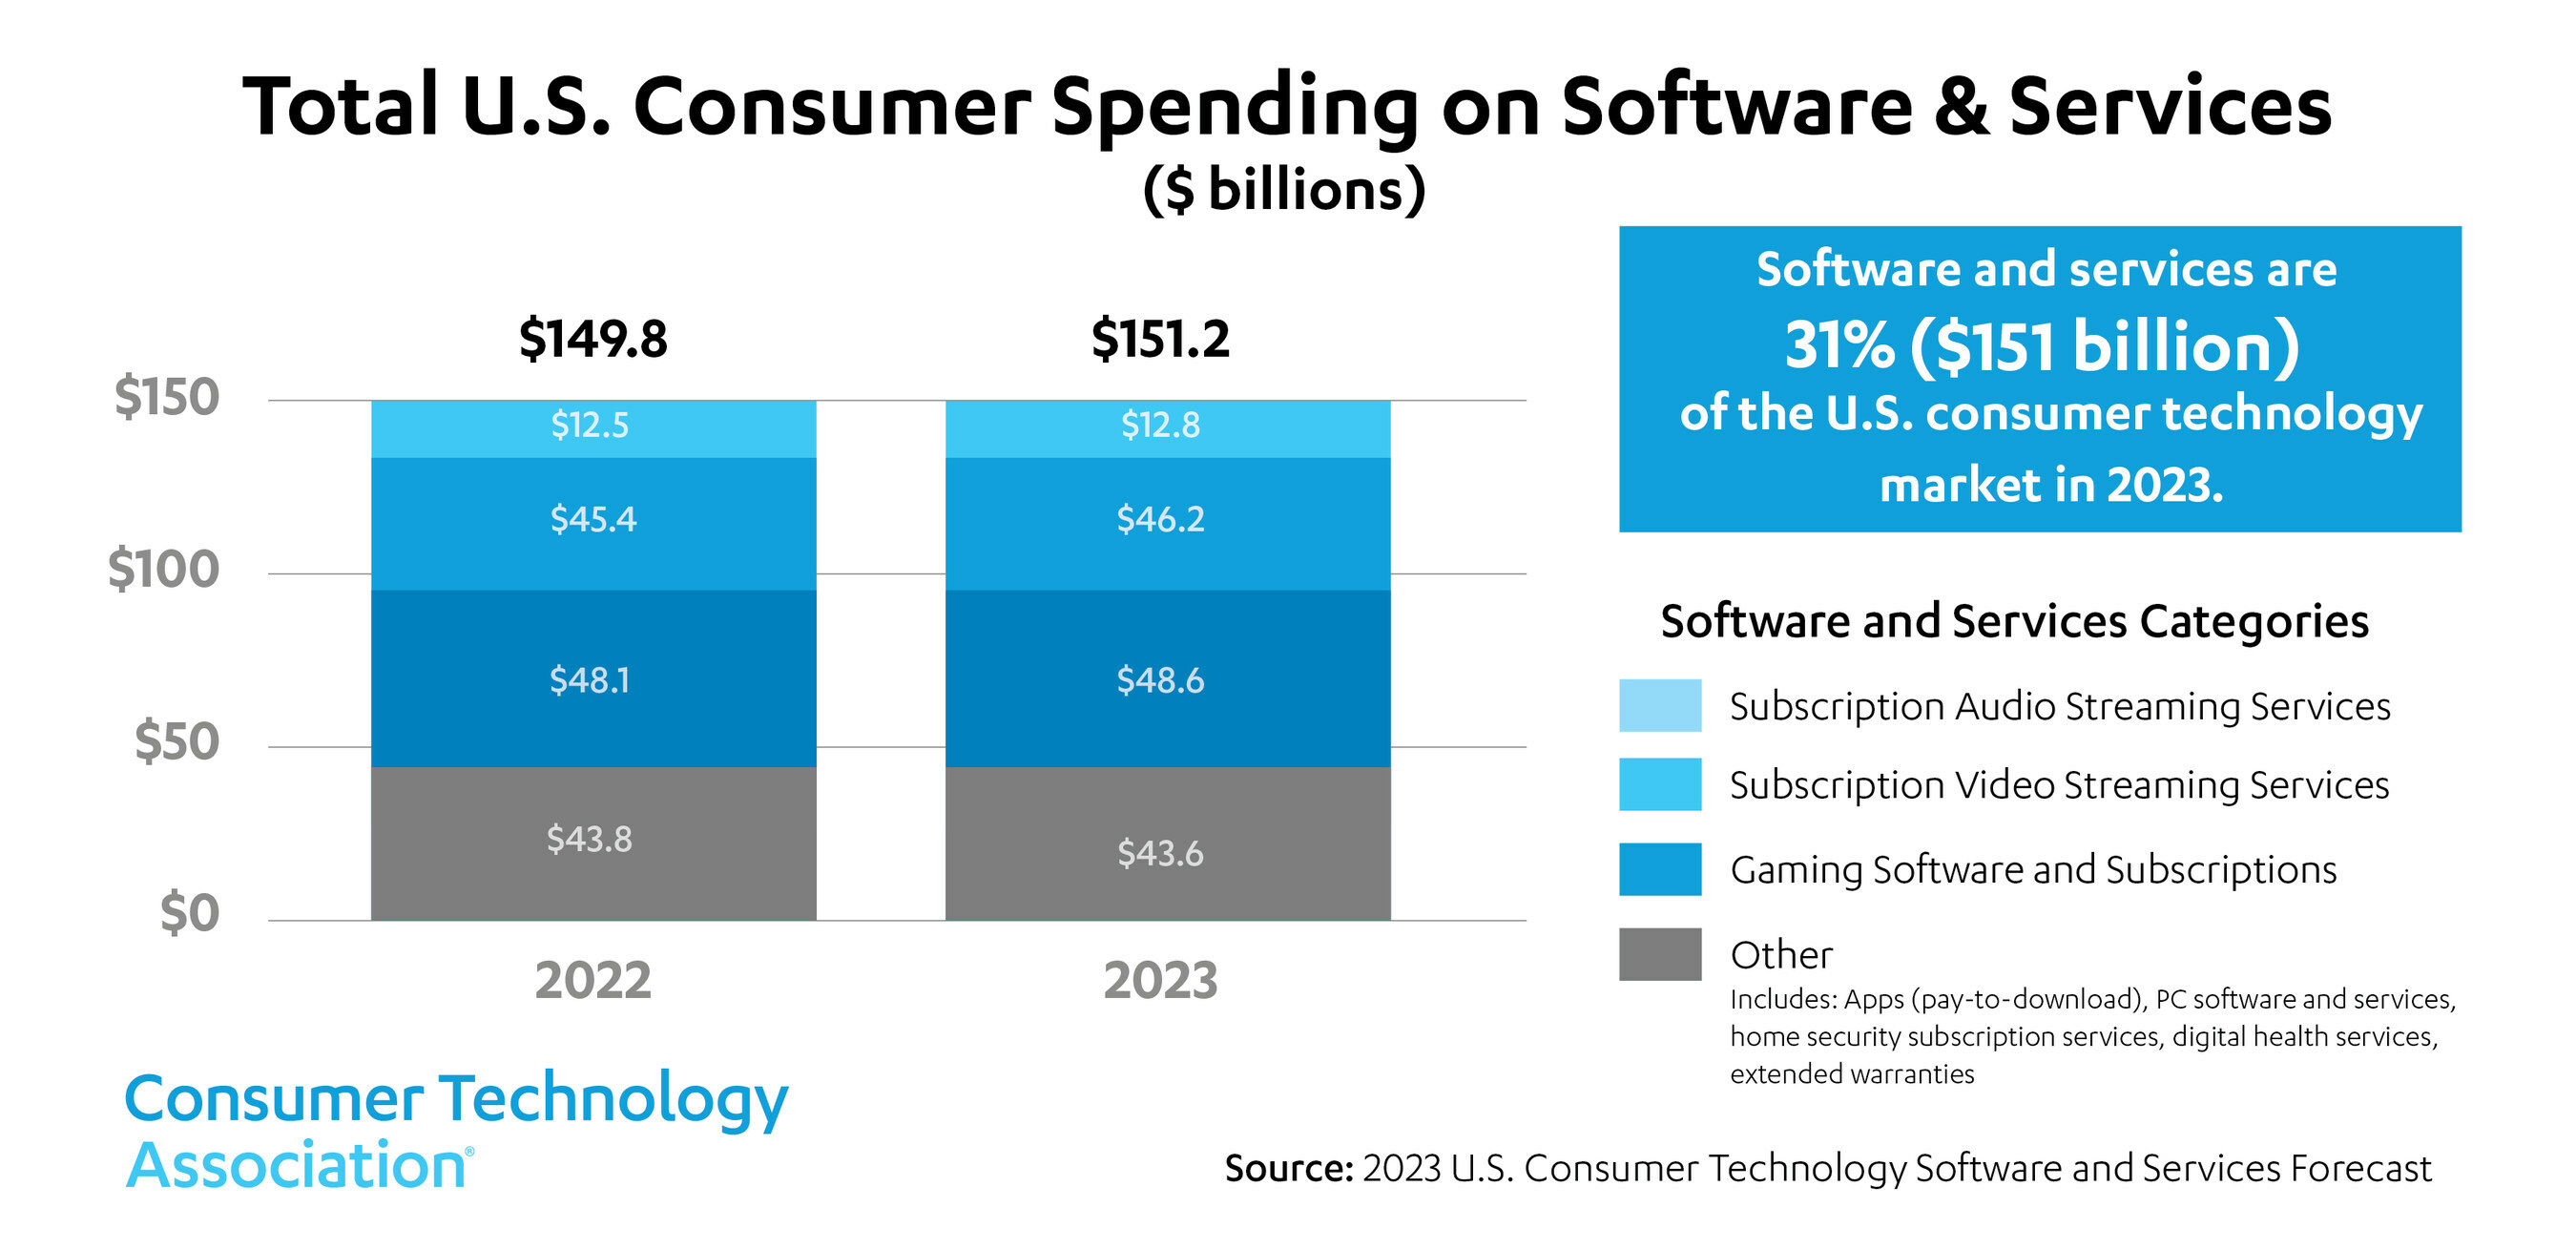 Total U.S. Consumer Spending on Software & Services ($ billions) Chart - 2022, 2023